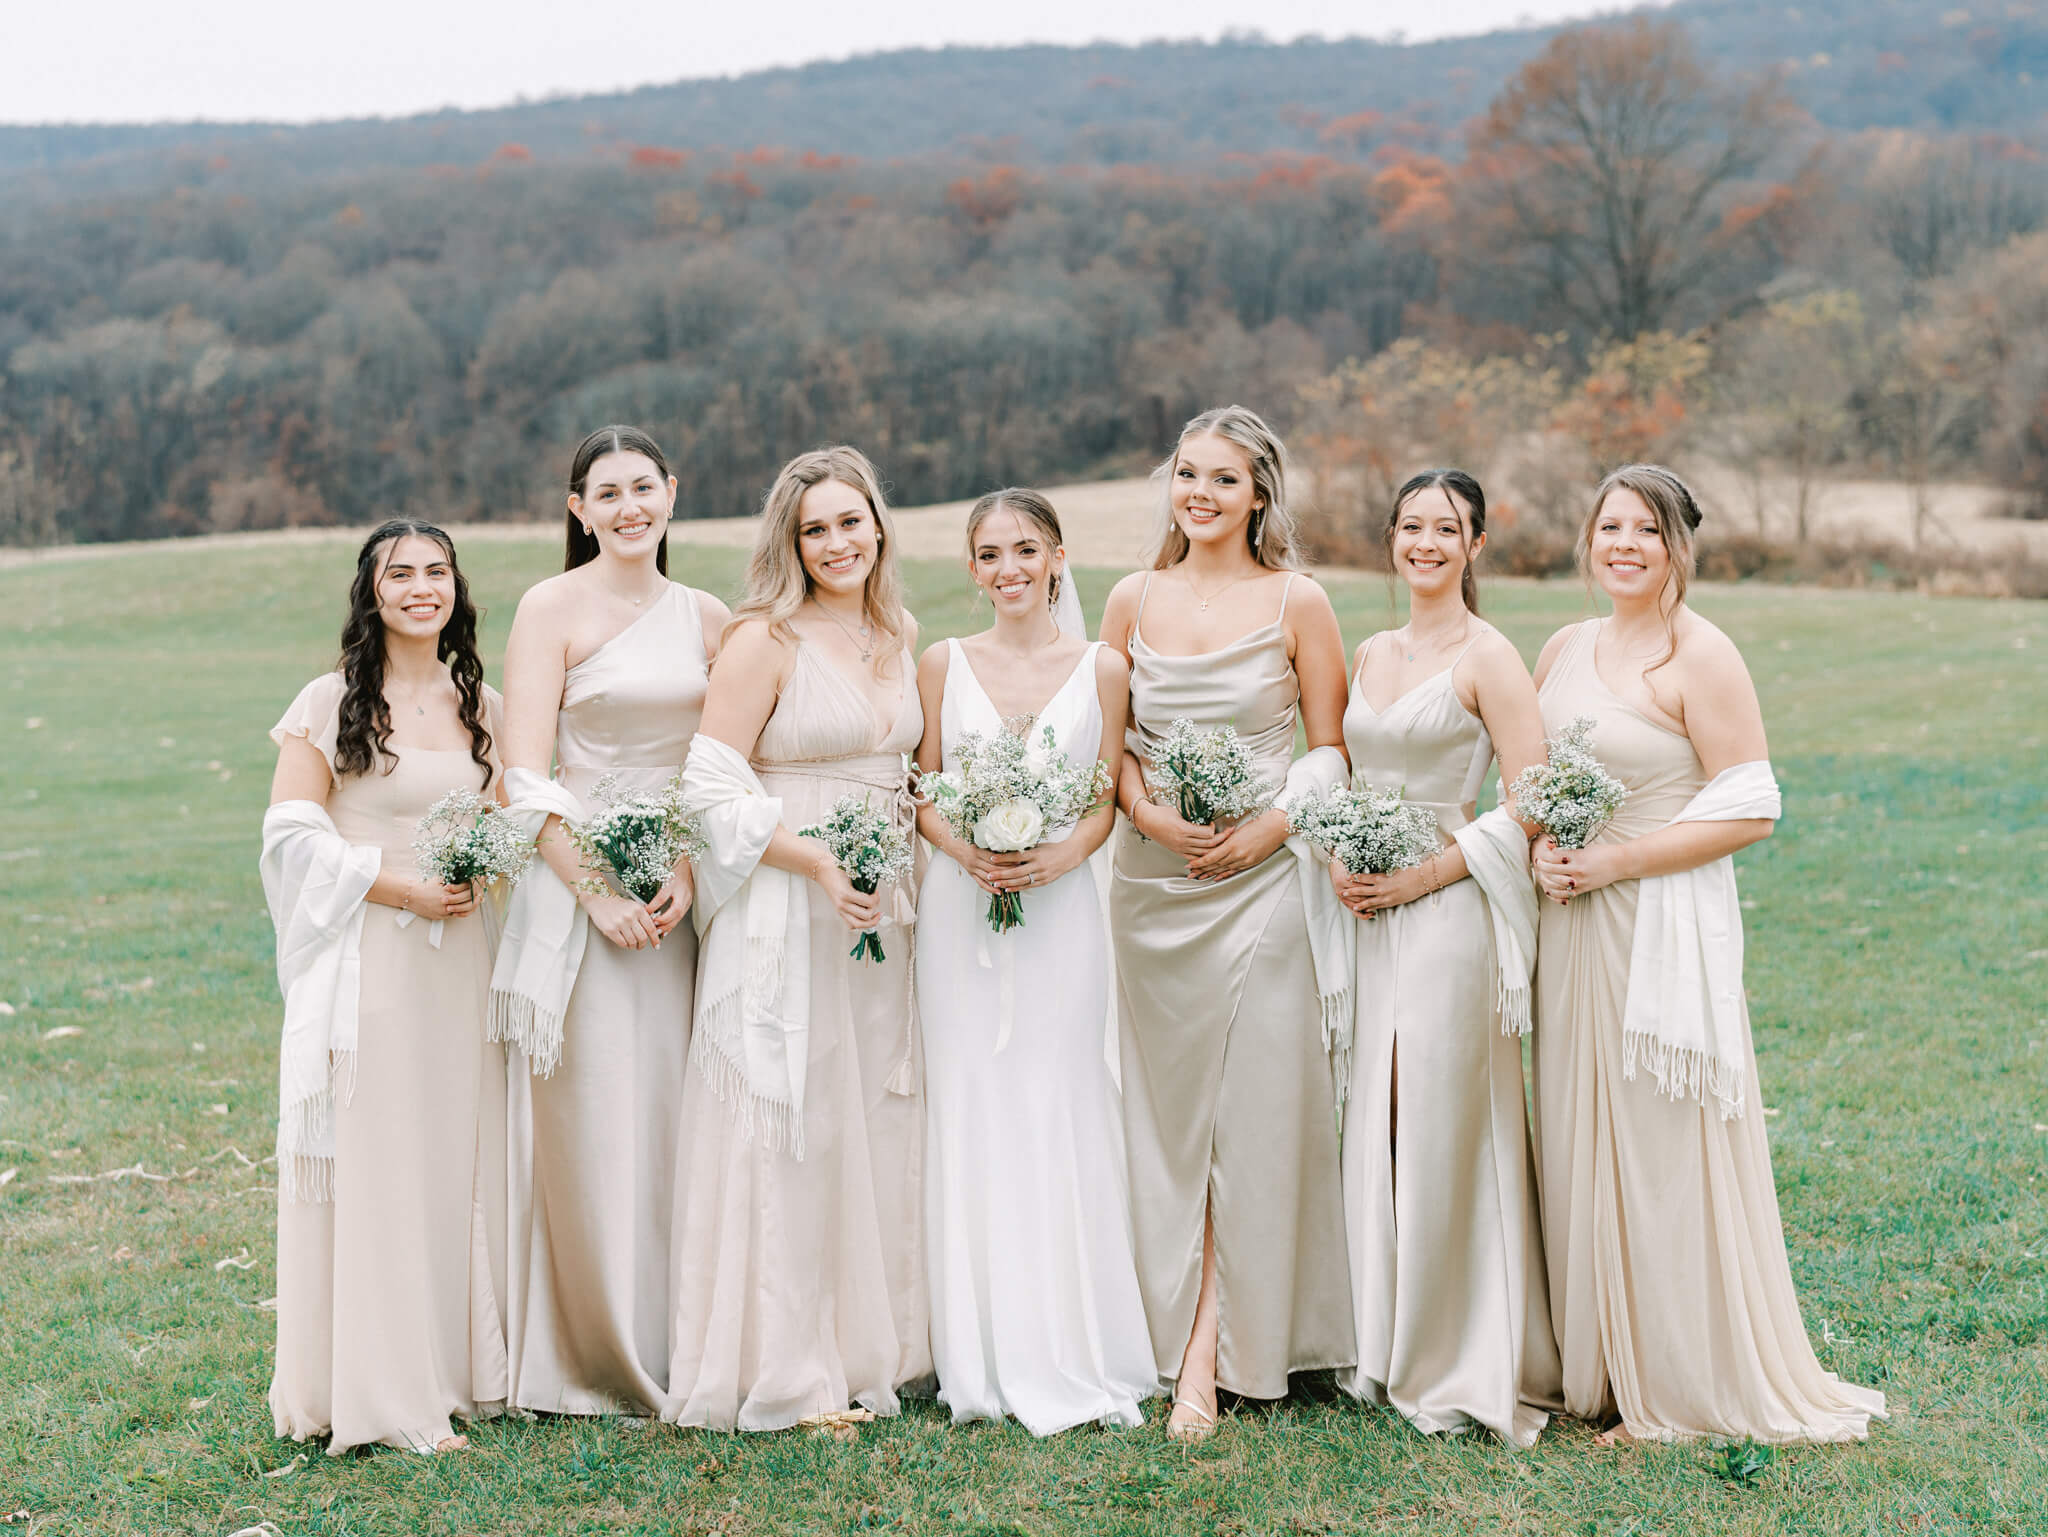 A bride and her bridesmaids in champagne satin dresses in front of a mountainous backdrop.